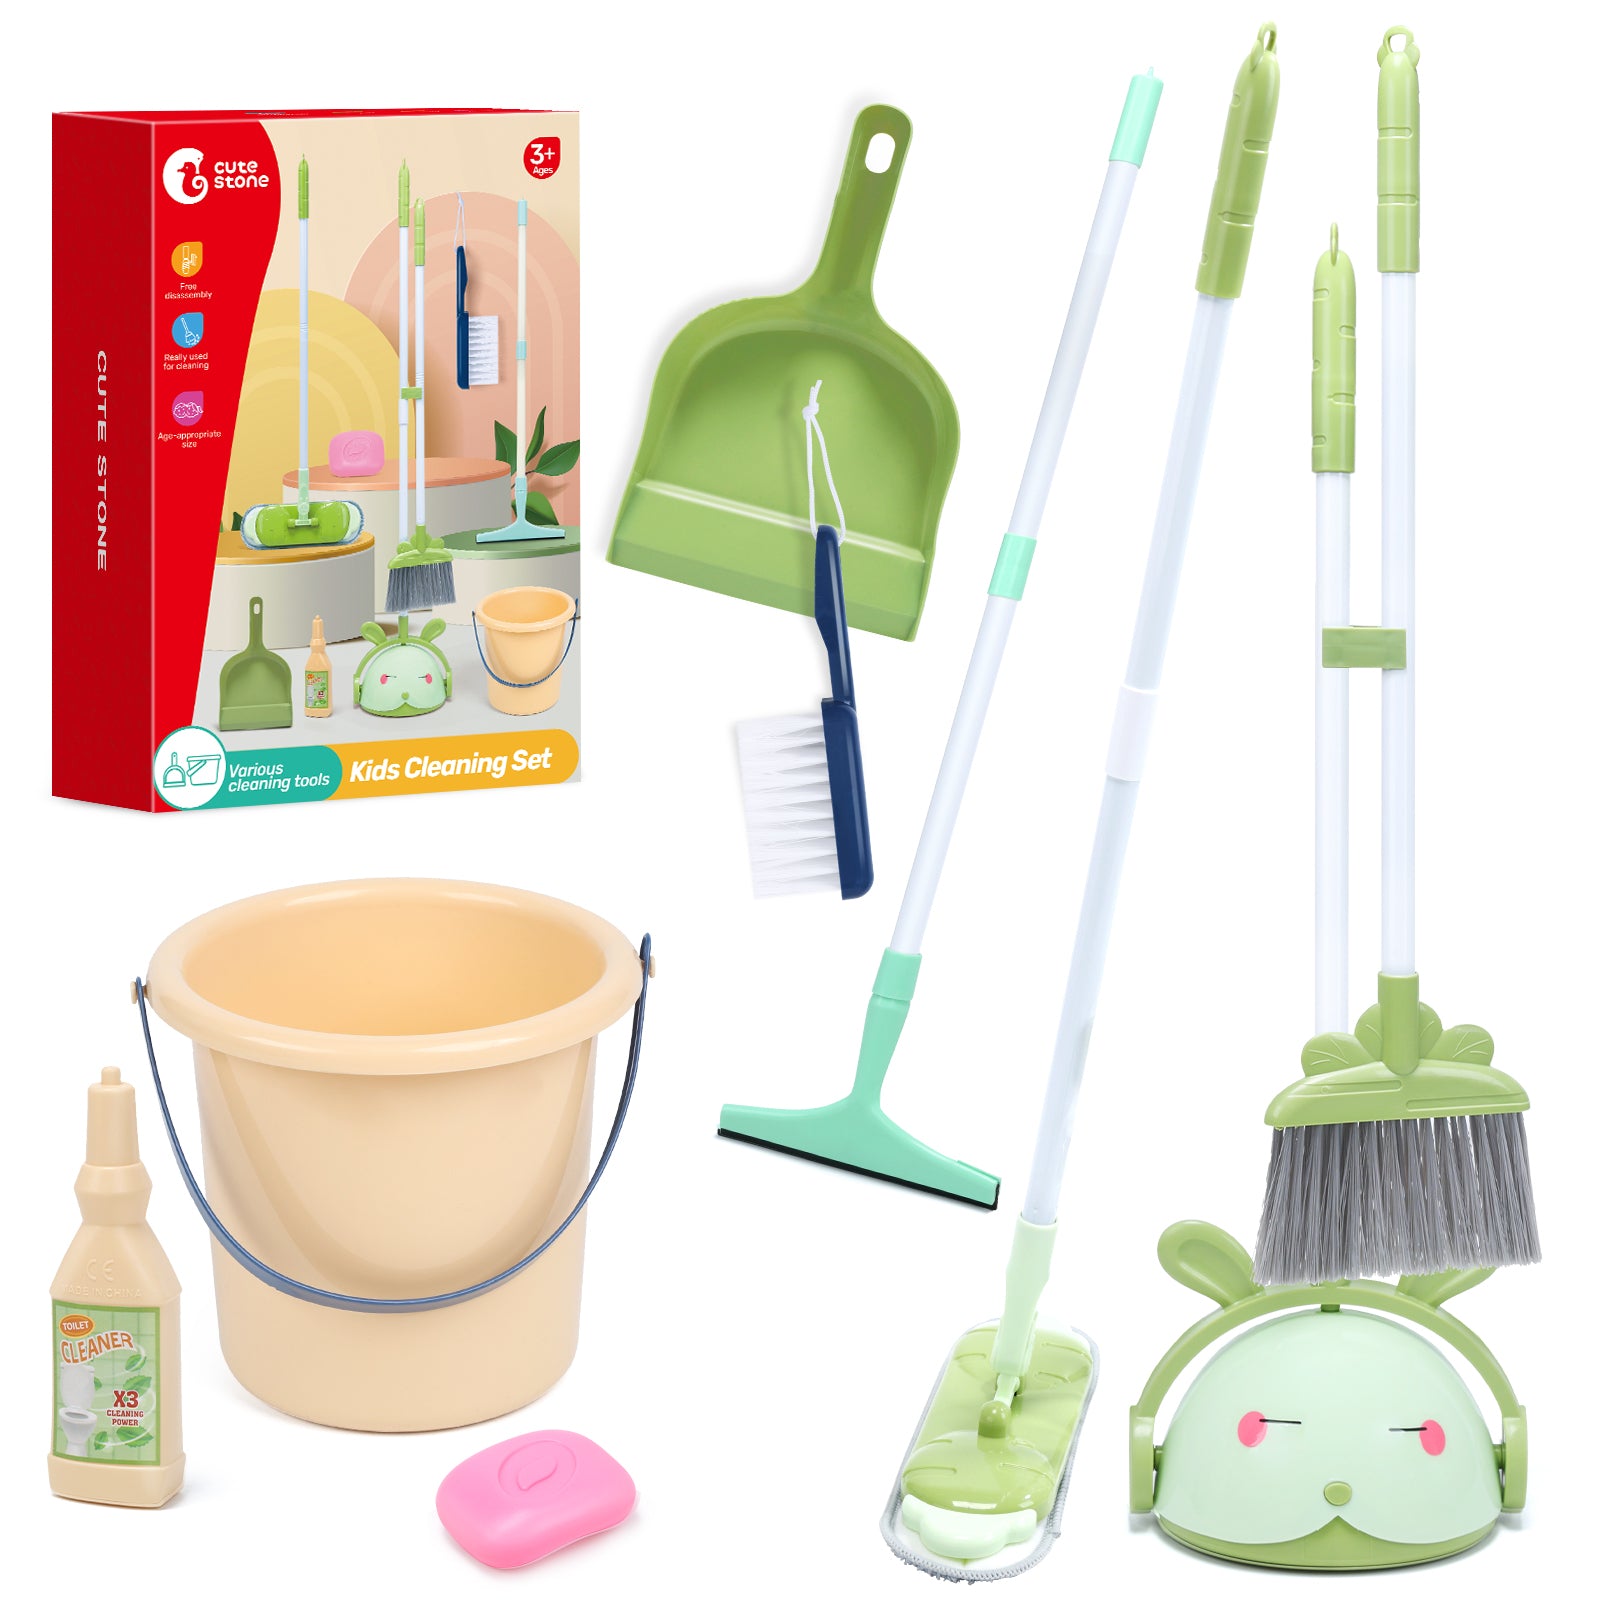 CUTE STONE Toddler Cleaning Set, 9 Pcs Kids Cleaning Toy Set Includes Kids Broom and Dustpan Set with Mop, Brush, Bucket, Scraper, Play Housekeeping Gift, Kids Cleaning Set for Toddlers 3-5 Year Old